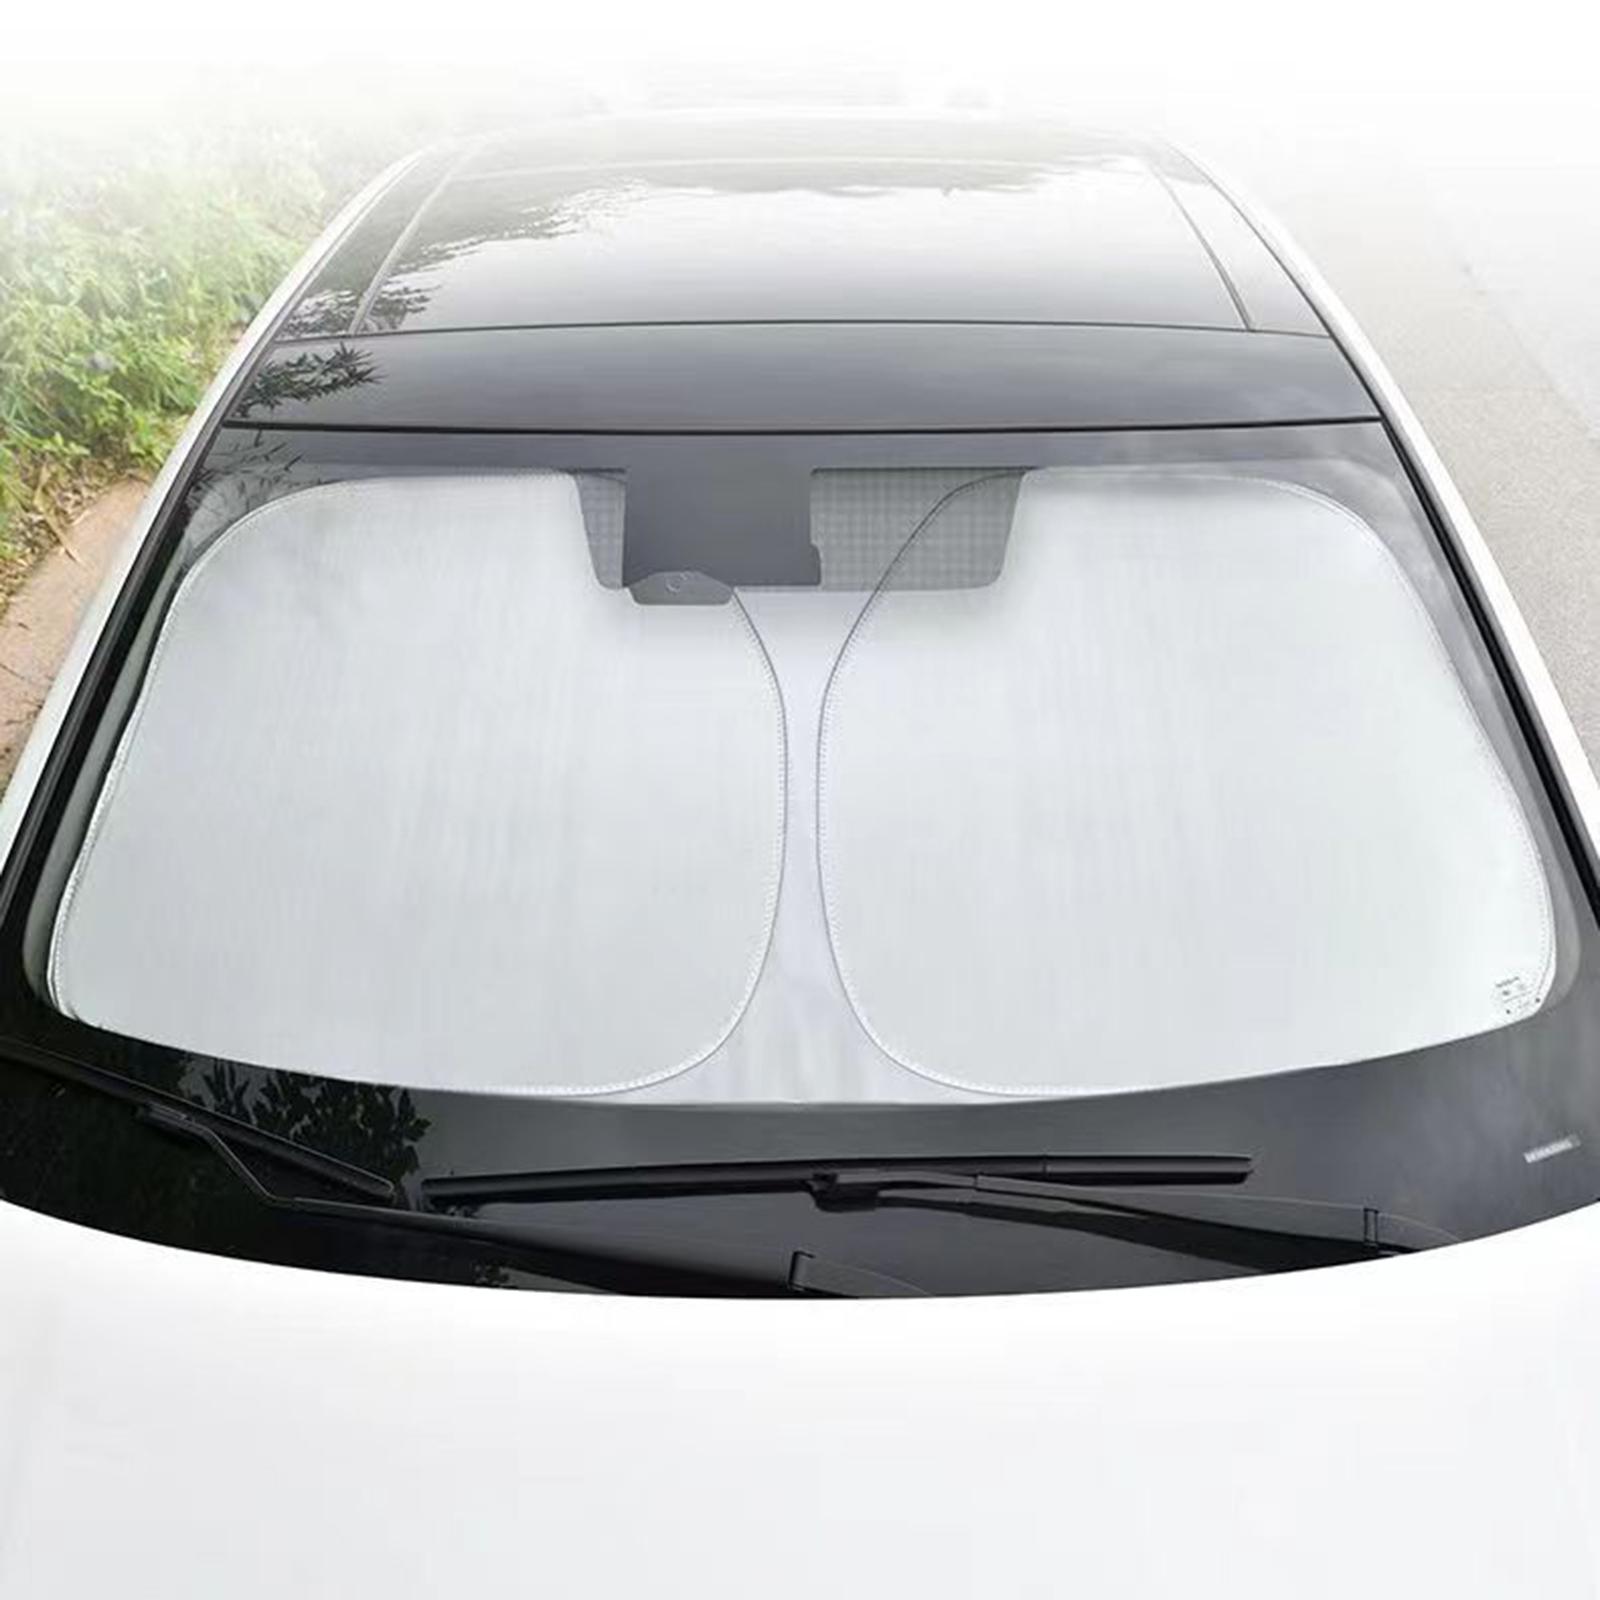 Front Window Sunscreen Protector for Front Window Car SUV Truck Vehicle 145cmx80cm